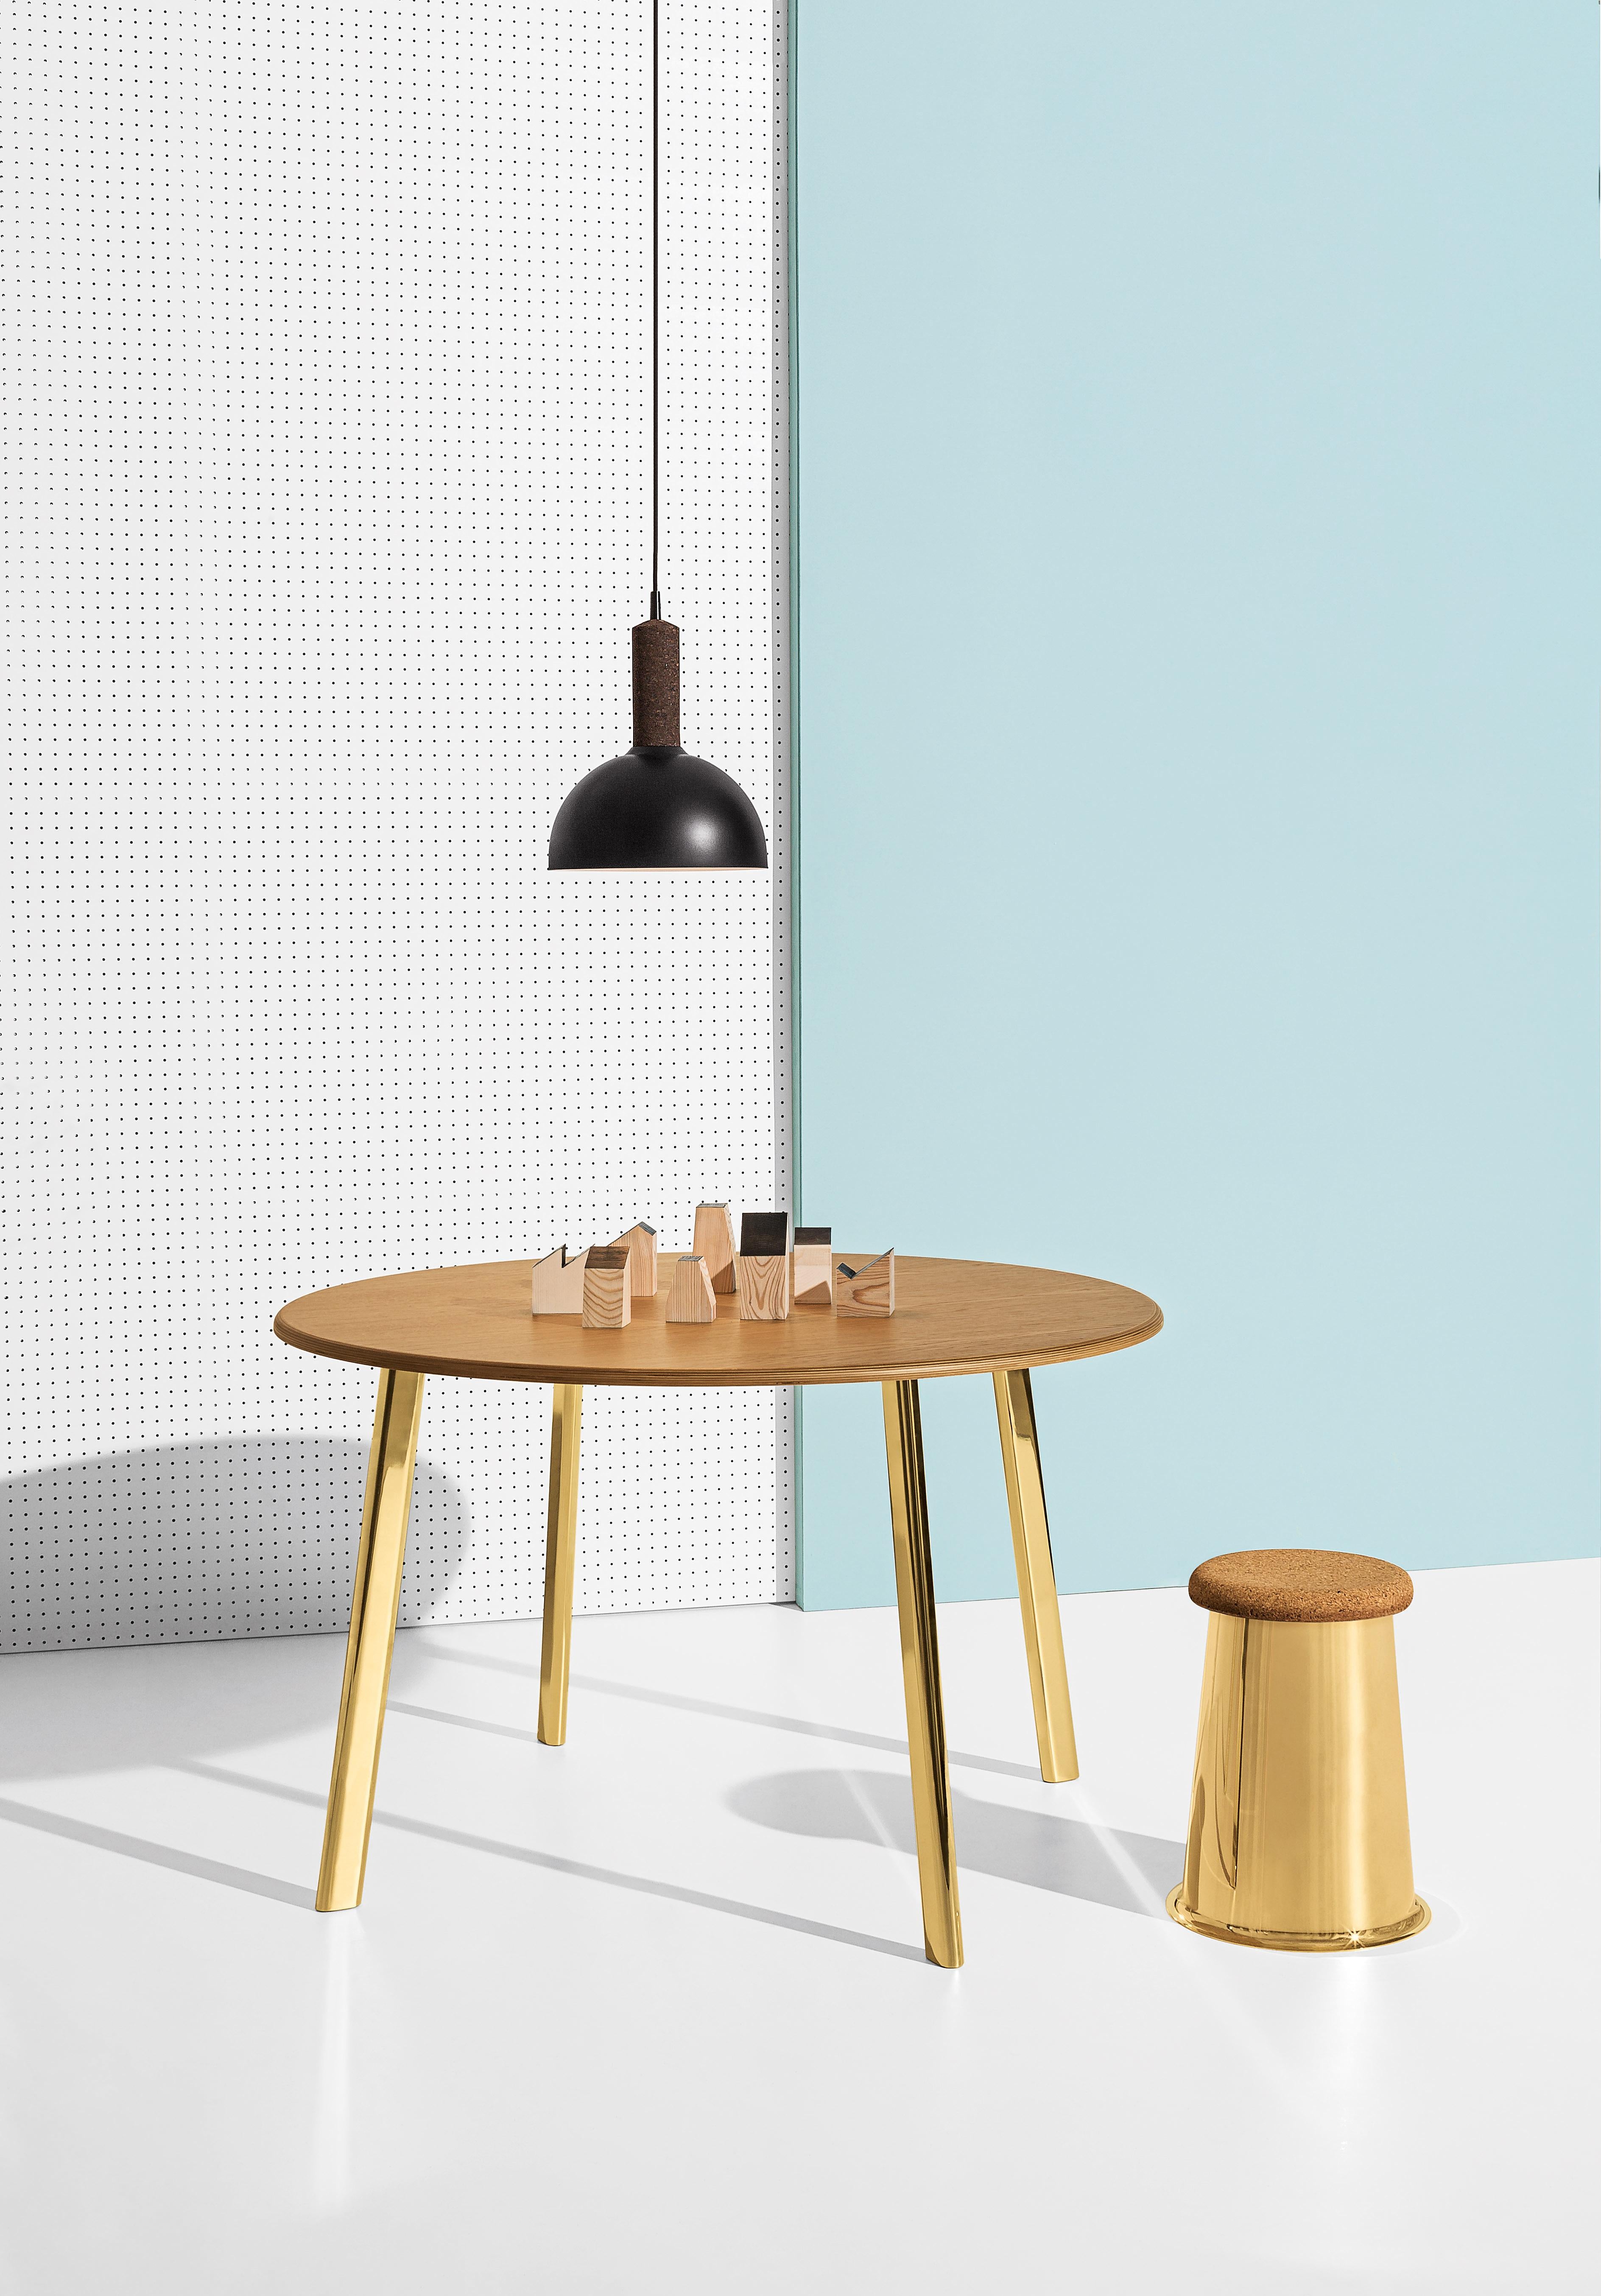 Contemporary Siit Stool, Polished Copper Base and Dark Cork Seat by Discipline Lab